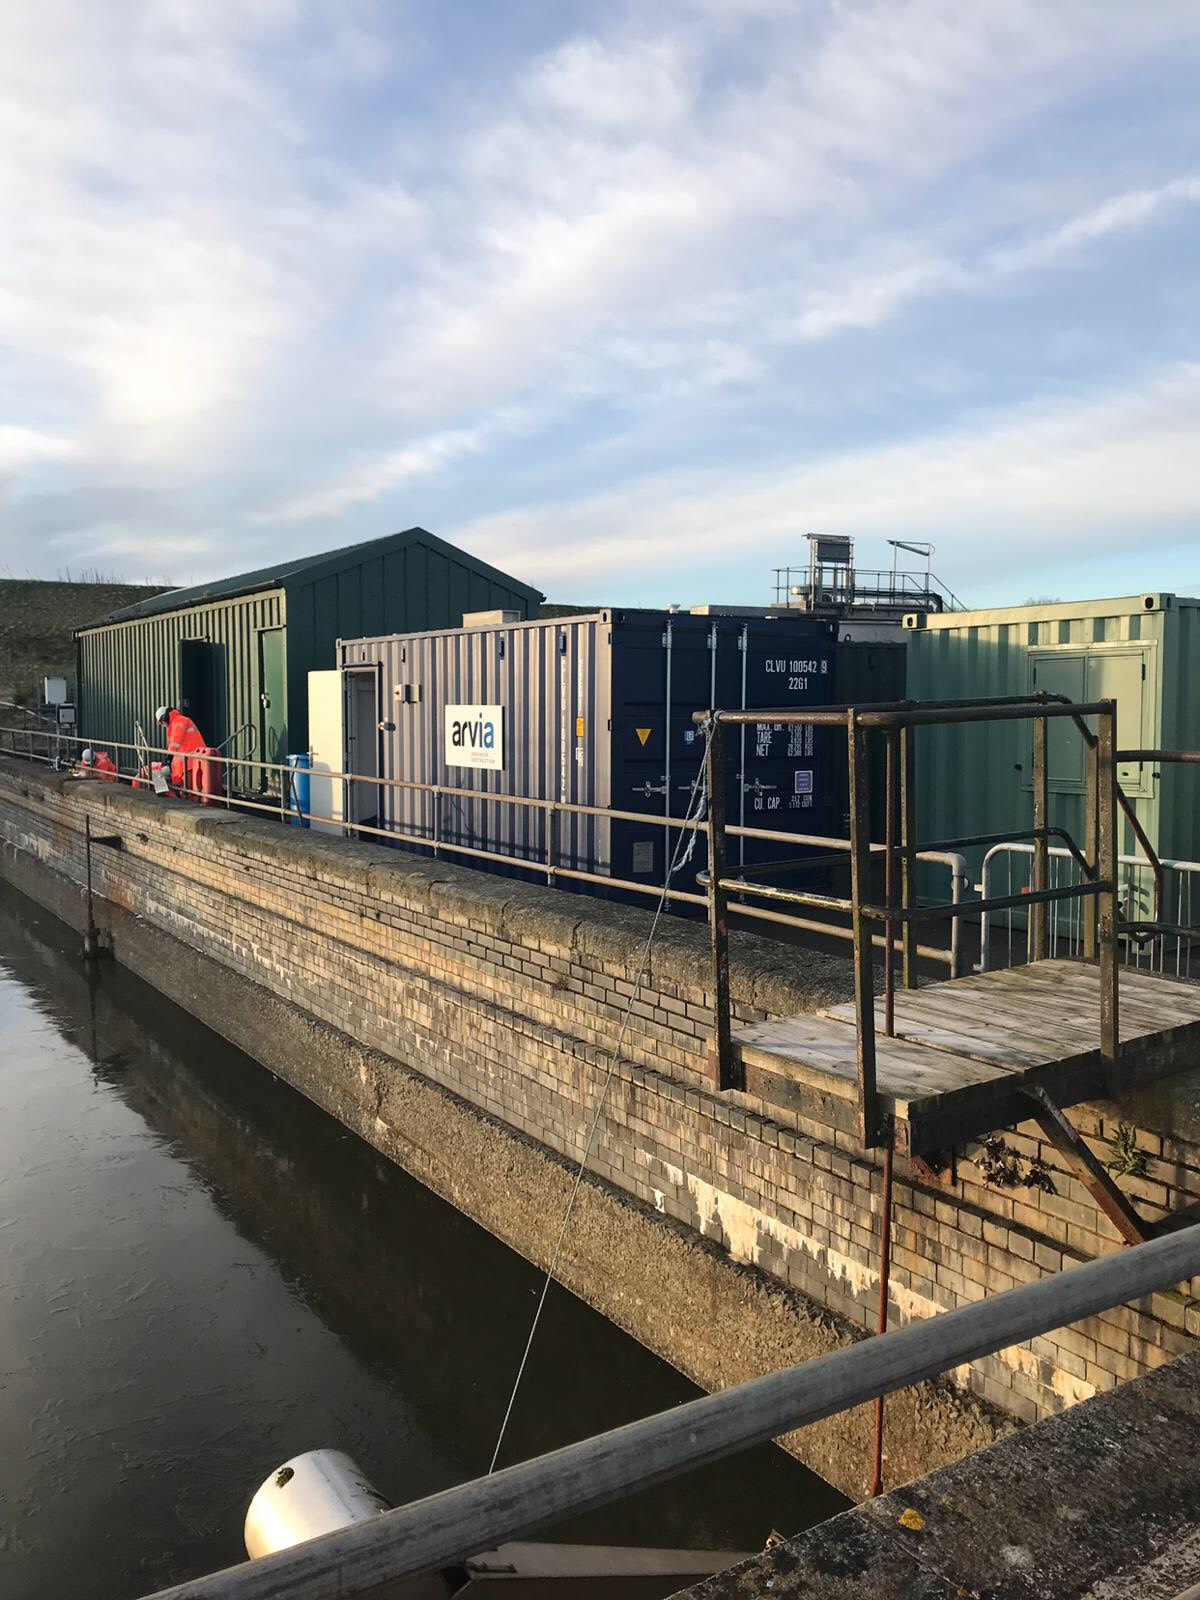 The containerised Nyex treatment system at the Pateshill water treatment works.